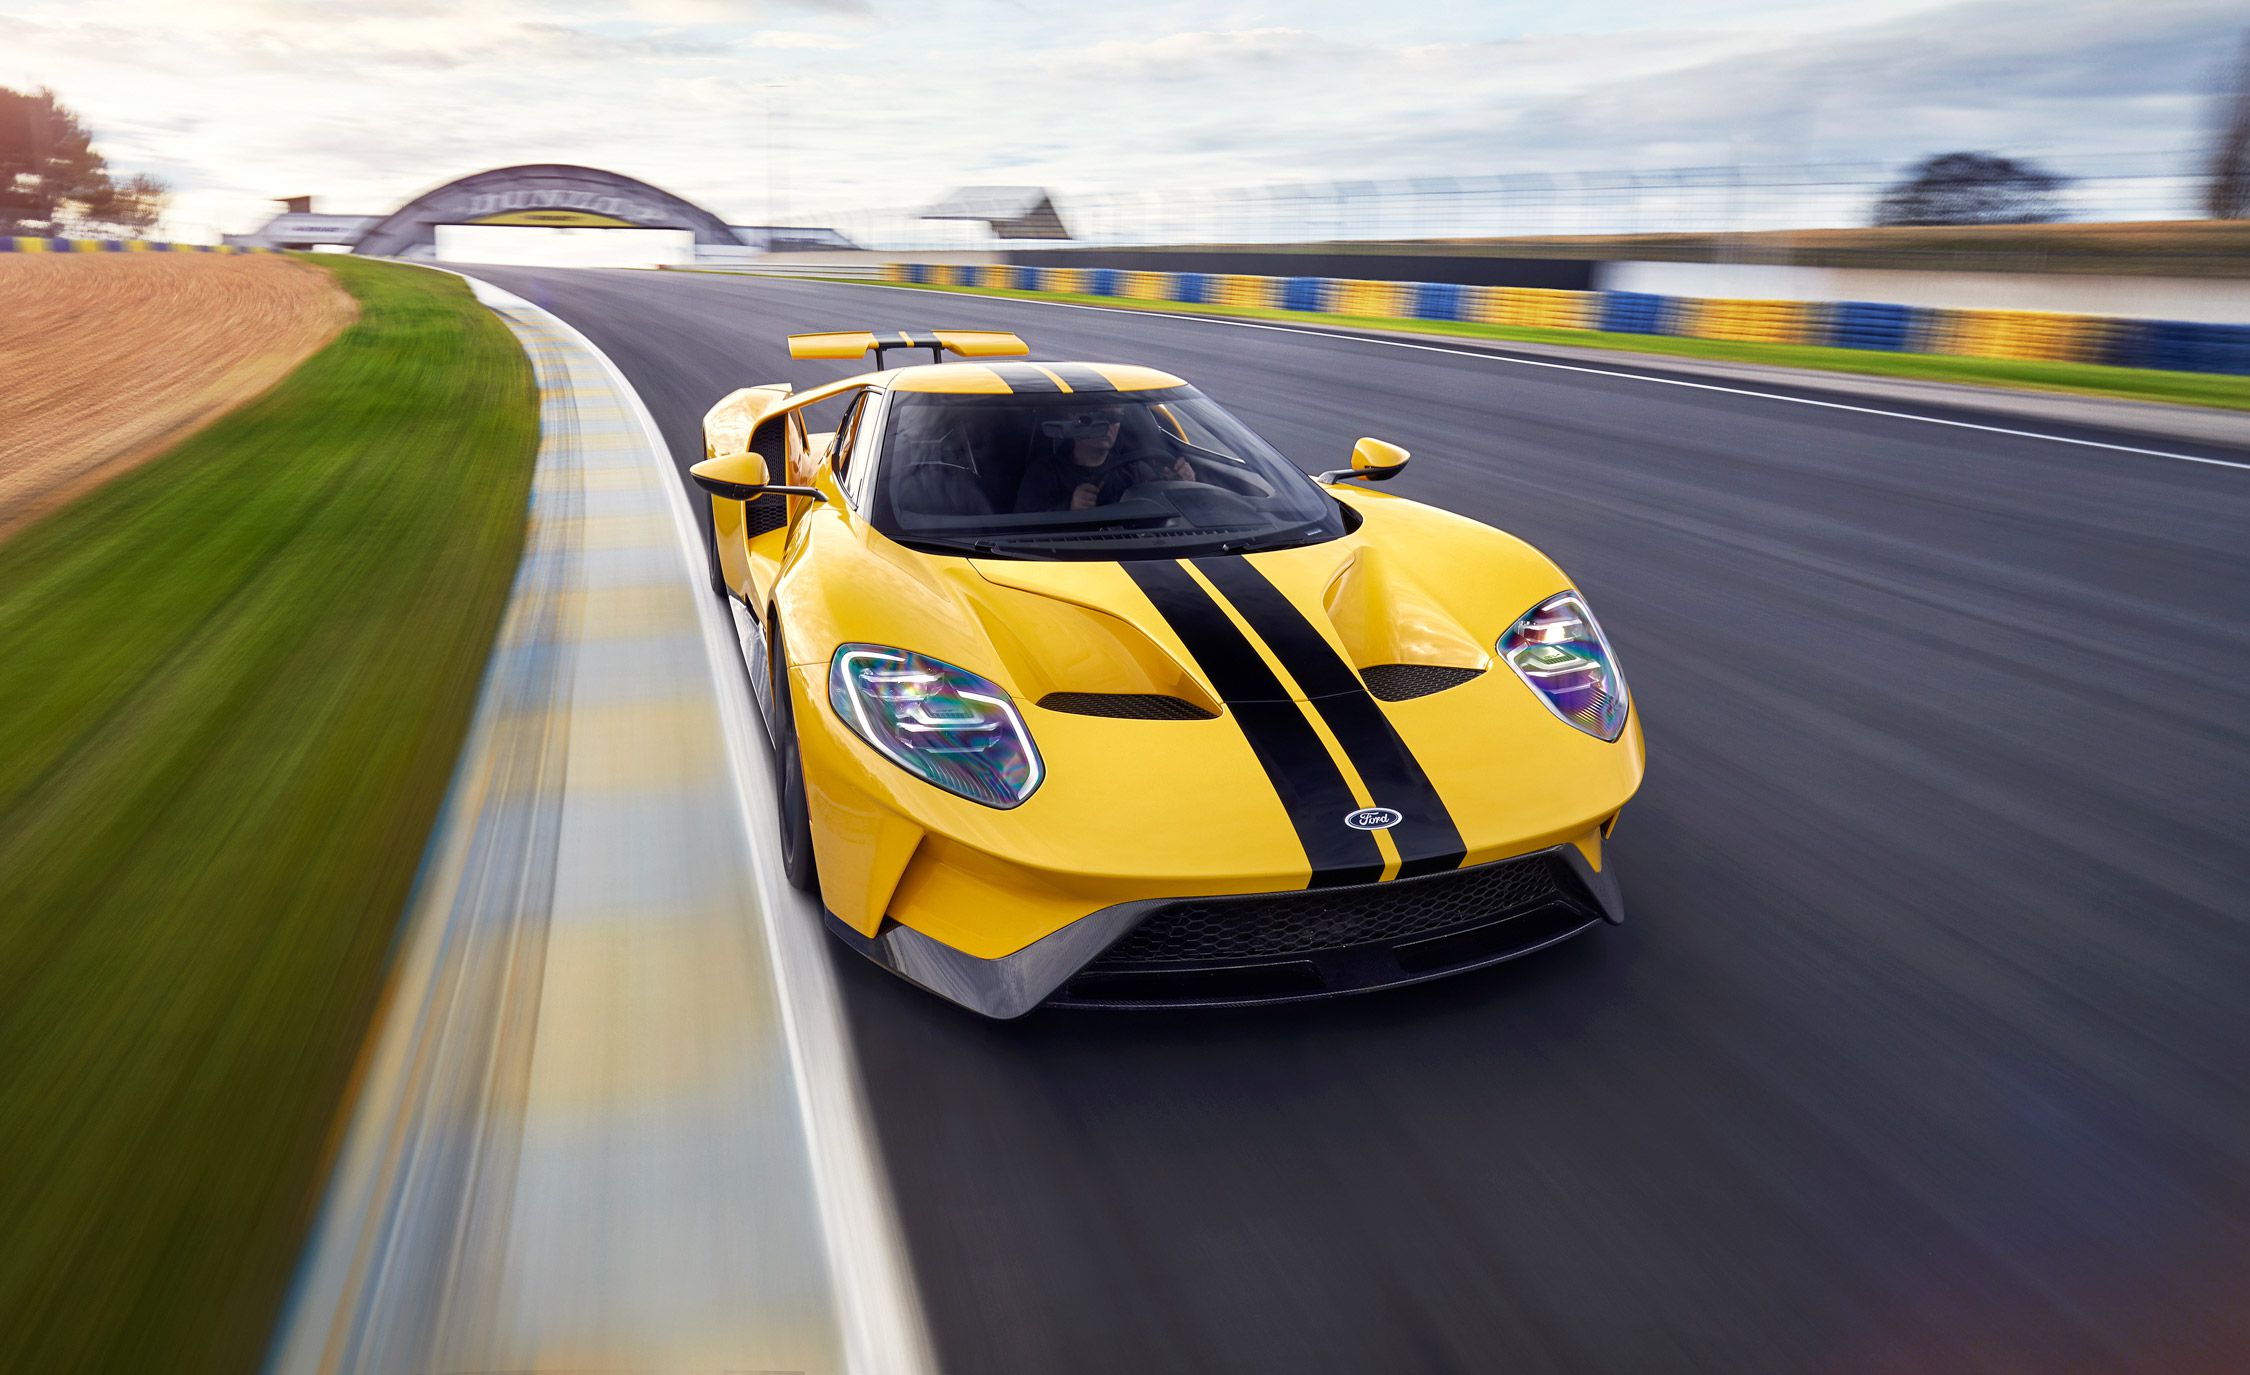 Ford GT Reviews | Ford GT Price, Photos, and Specs | Car and Driver